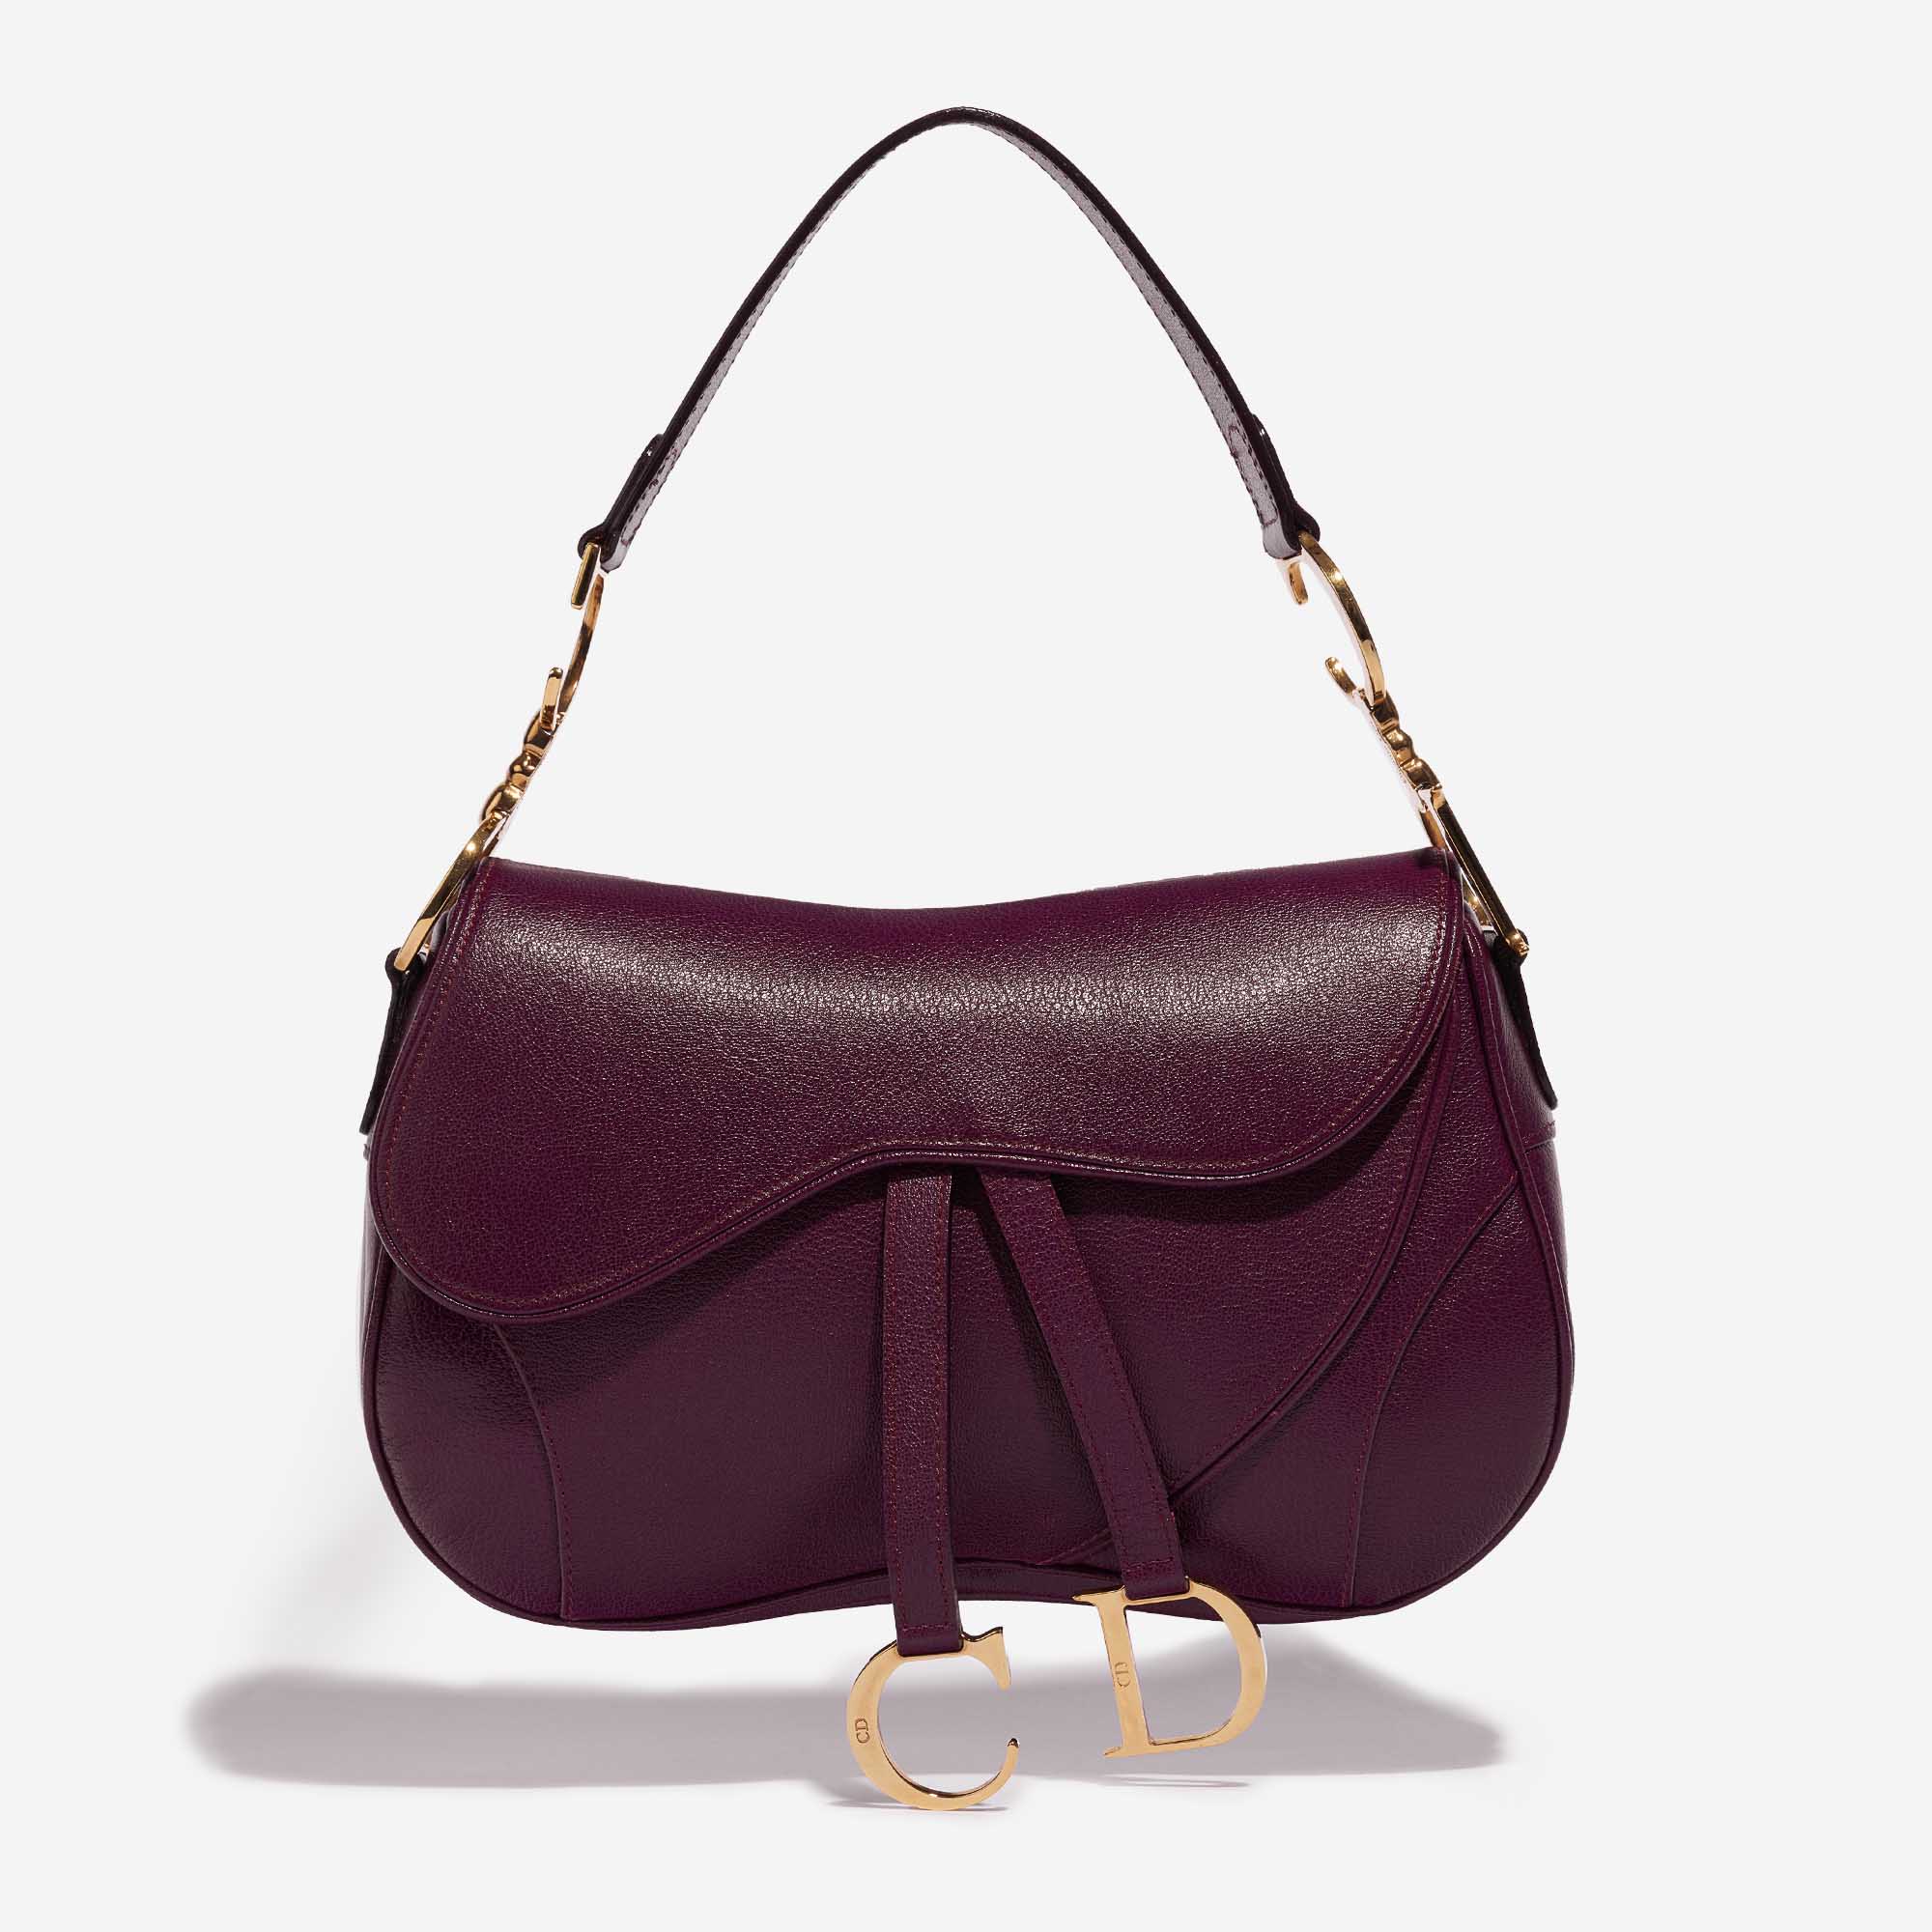 Totally Underrated The Christian Dior Lady Dior Bag  PurseBlog